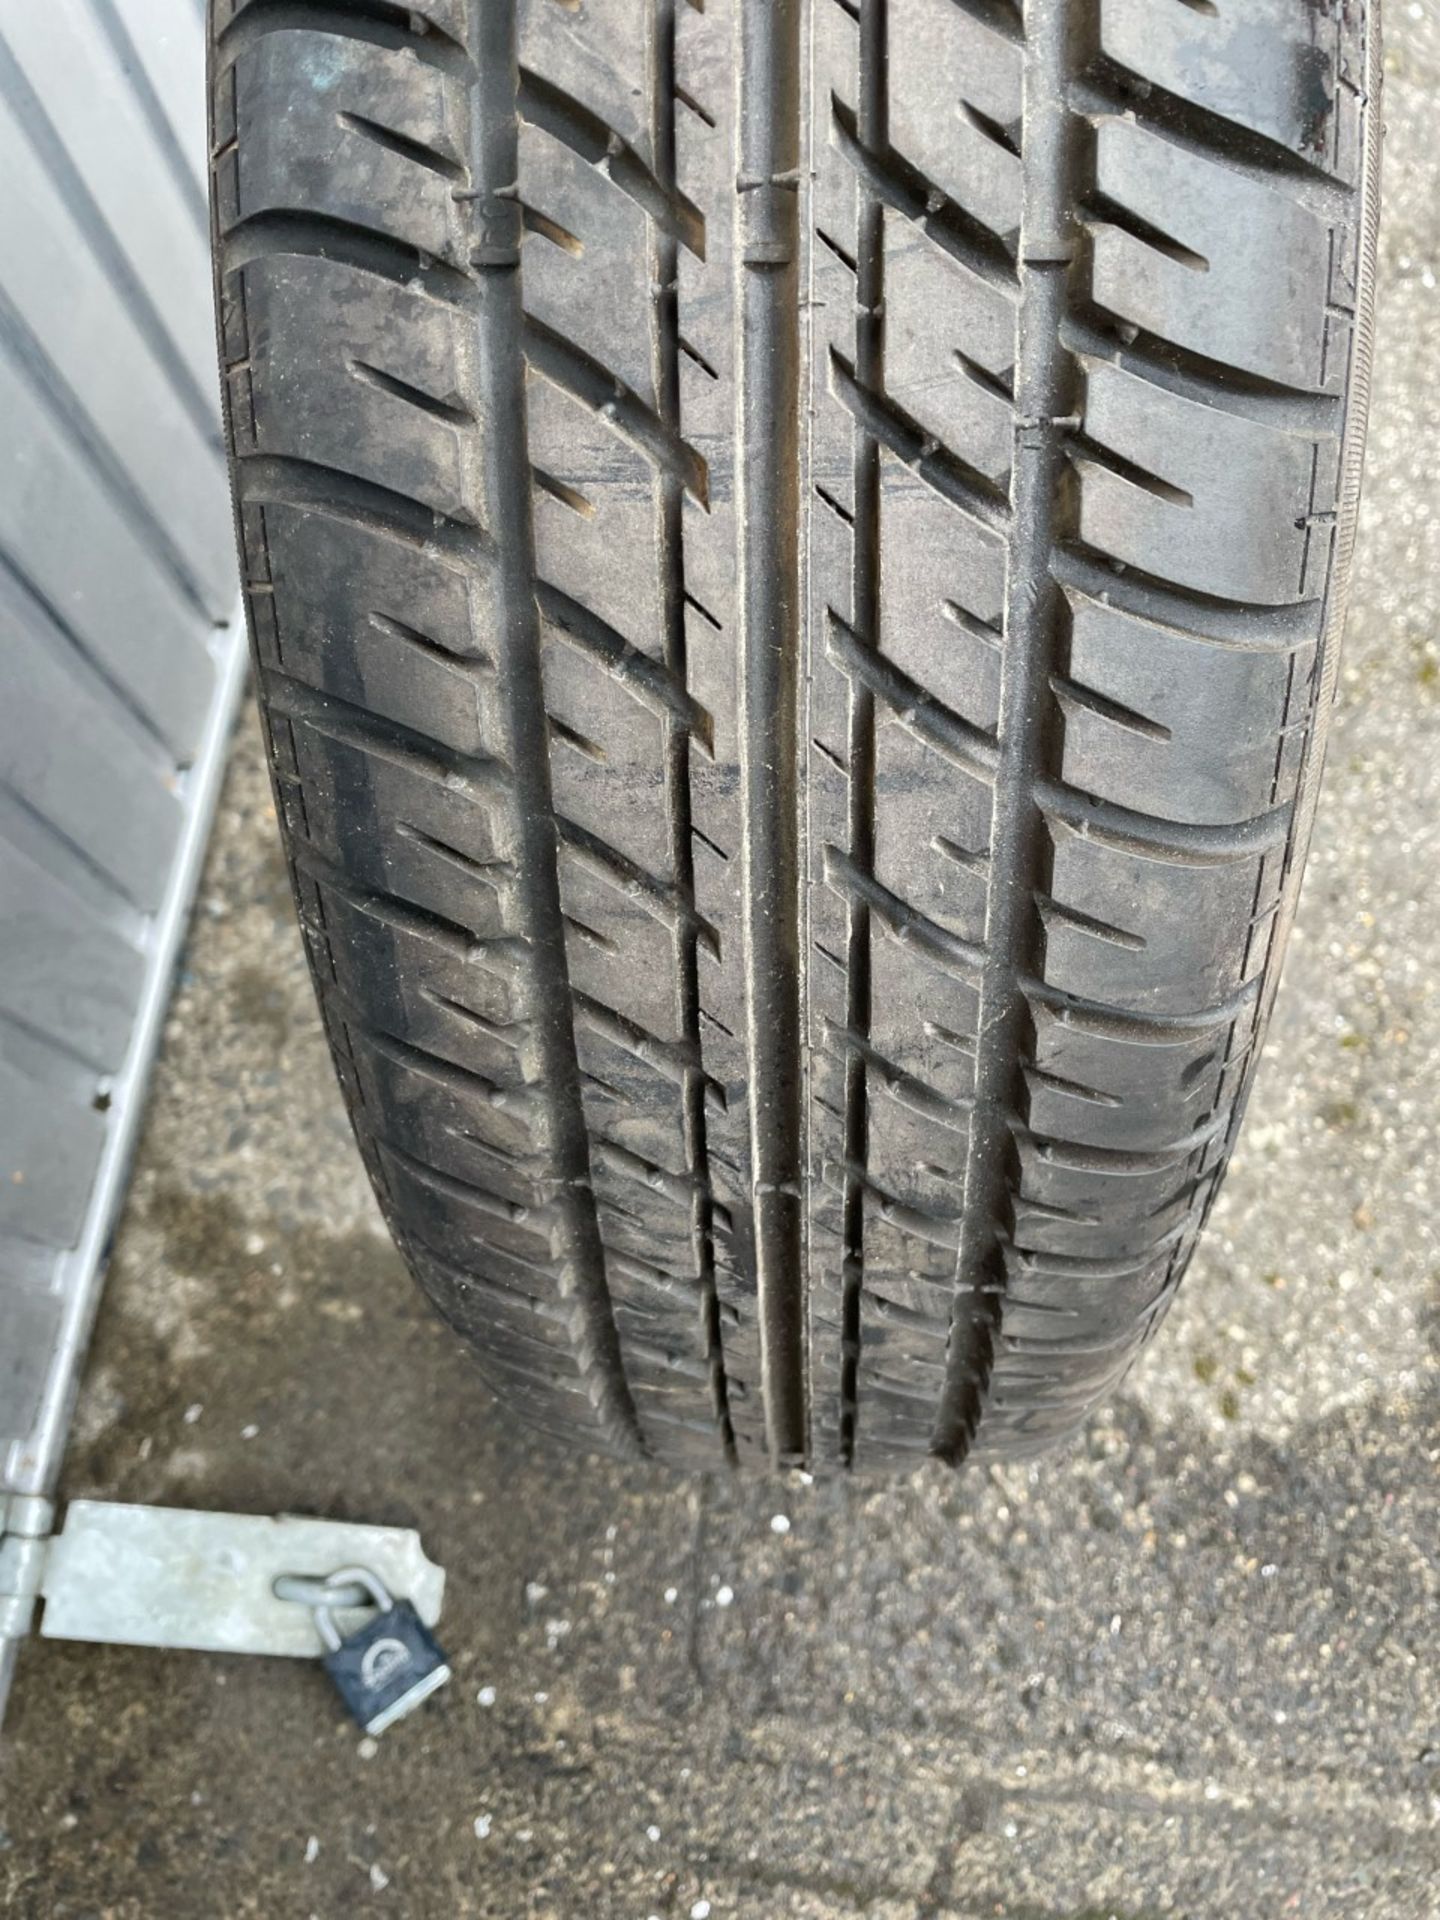 Tiger TG635 new tyre, 195/70 R14 91H - Image 2 of 2